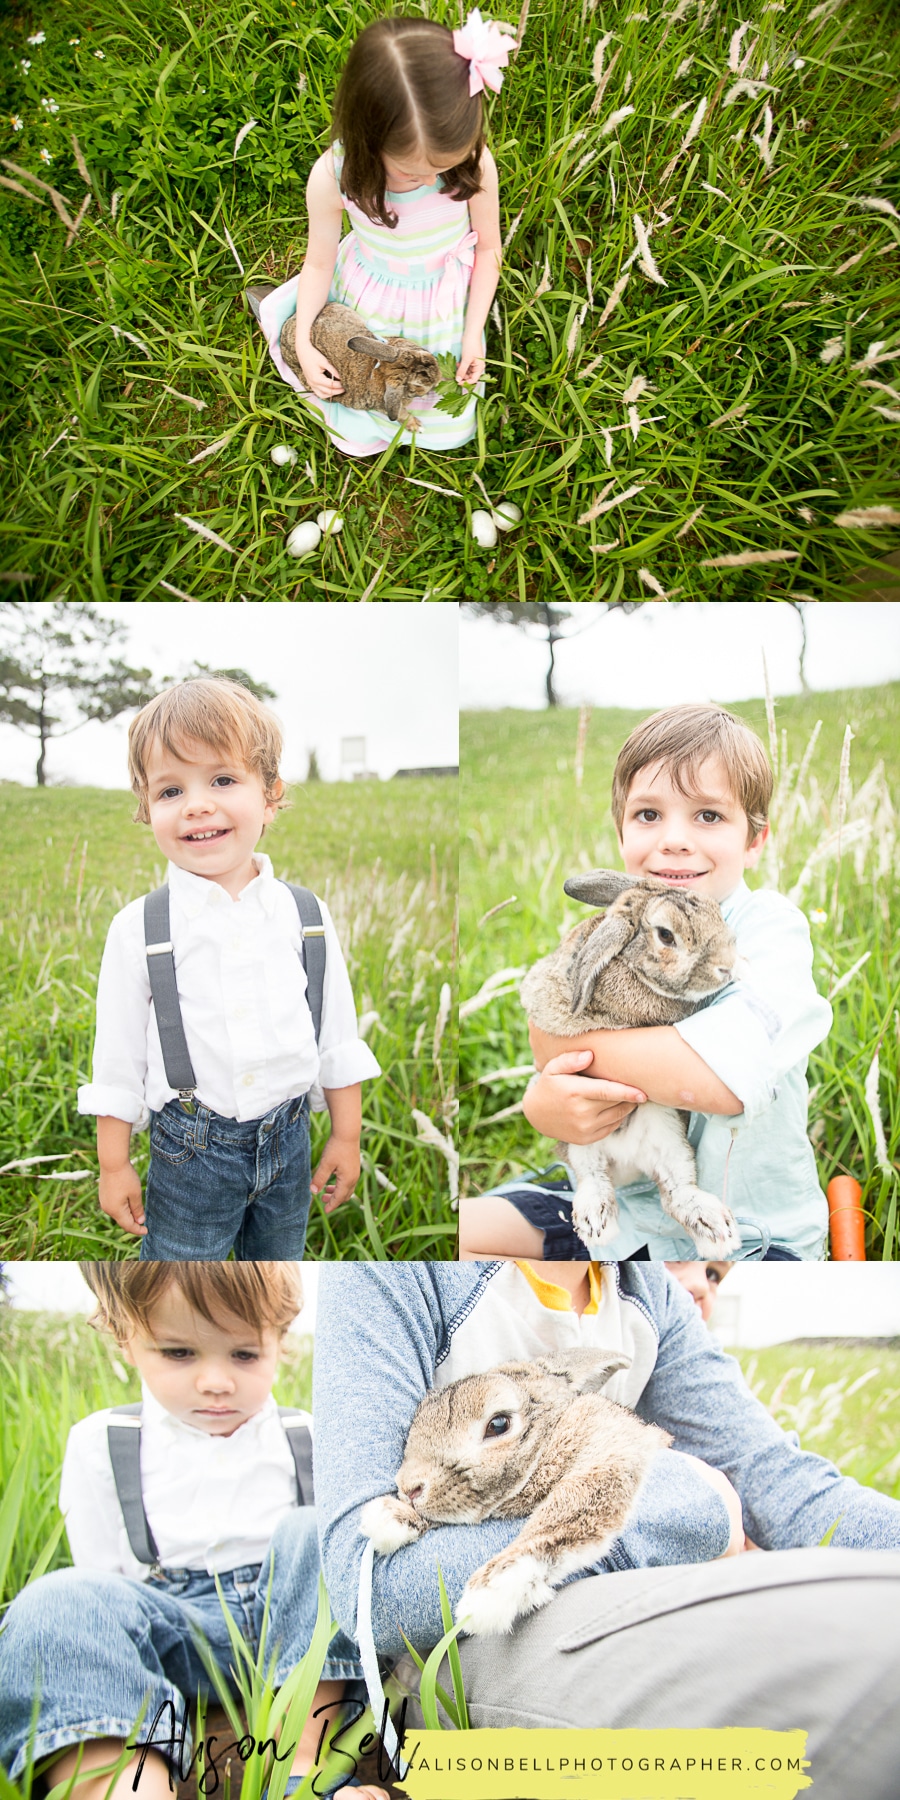 Mini session photography with a live bunny for easter by Alison Bell Photographer